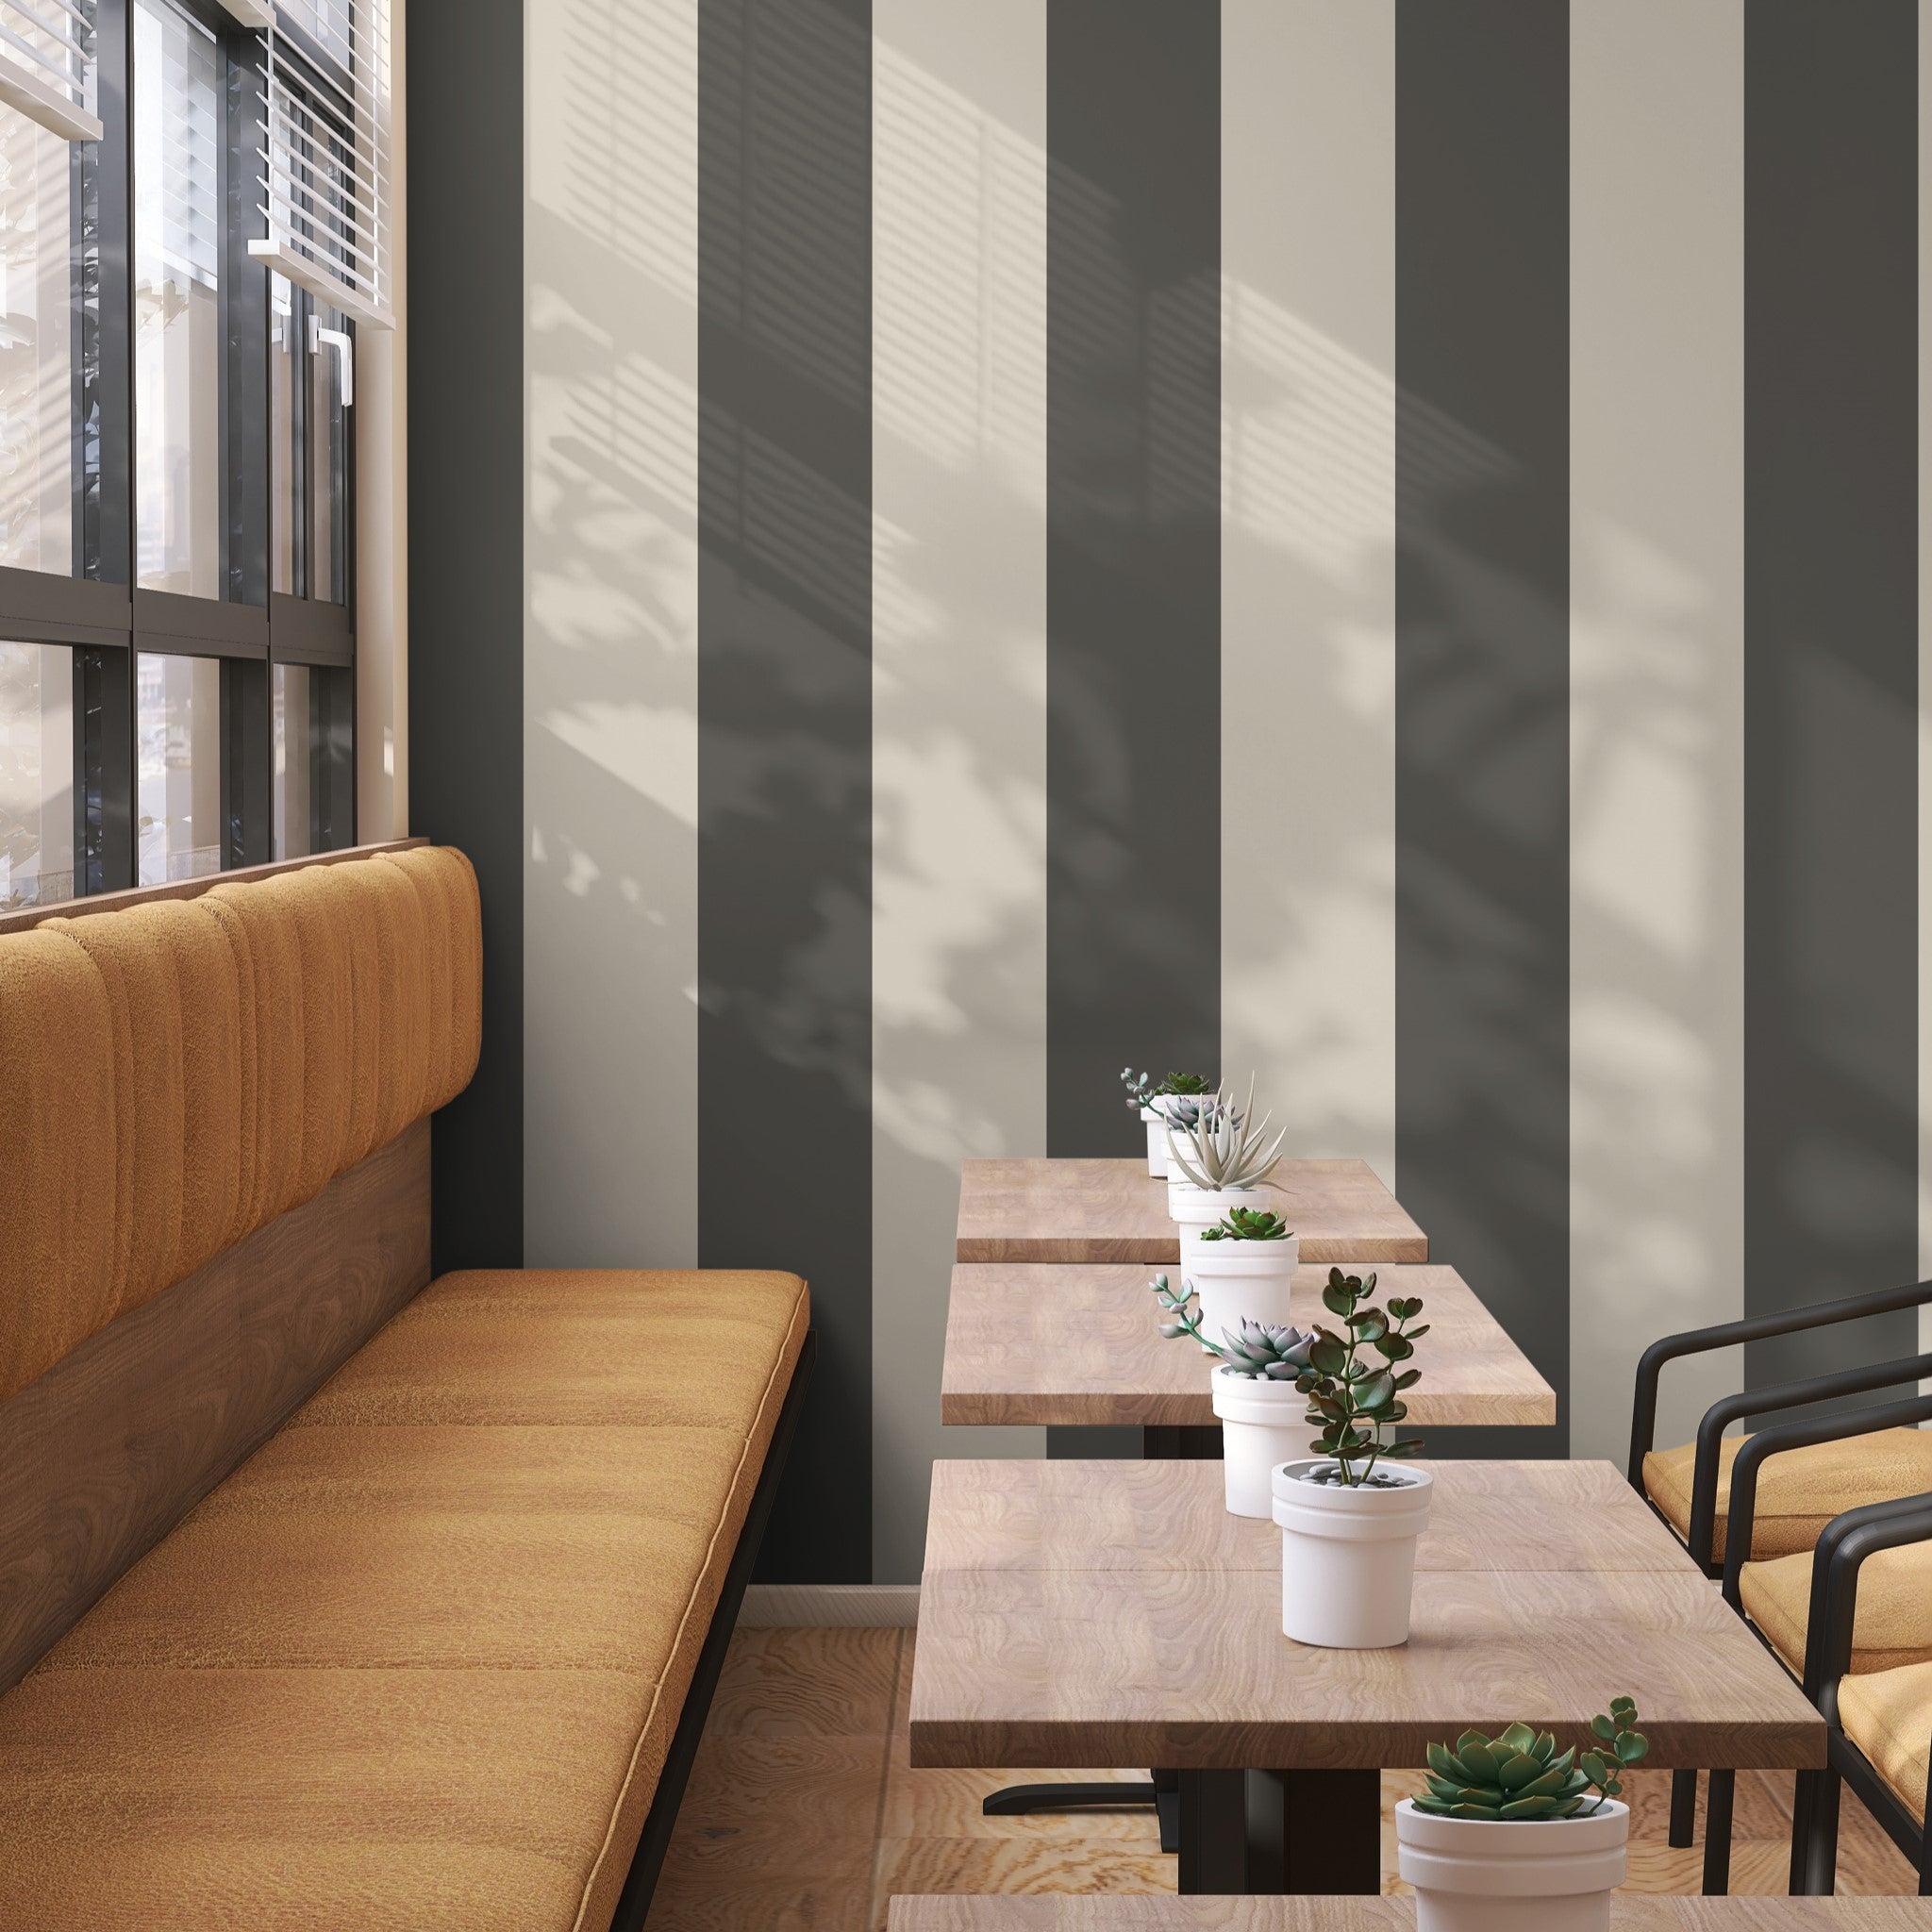 "Aldo Wallpaper by Wall Blush accentuating a modern cafe interior with striped design focus."